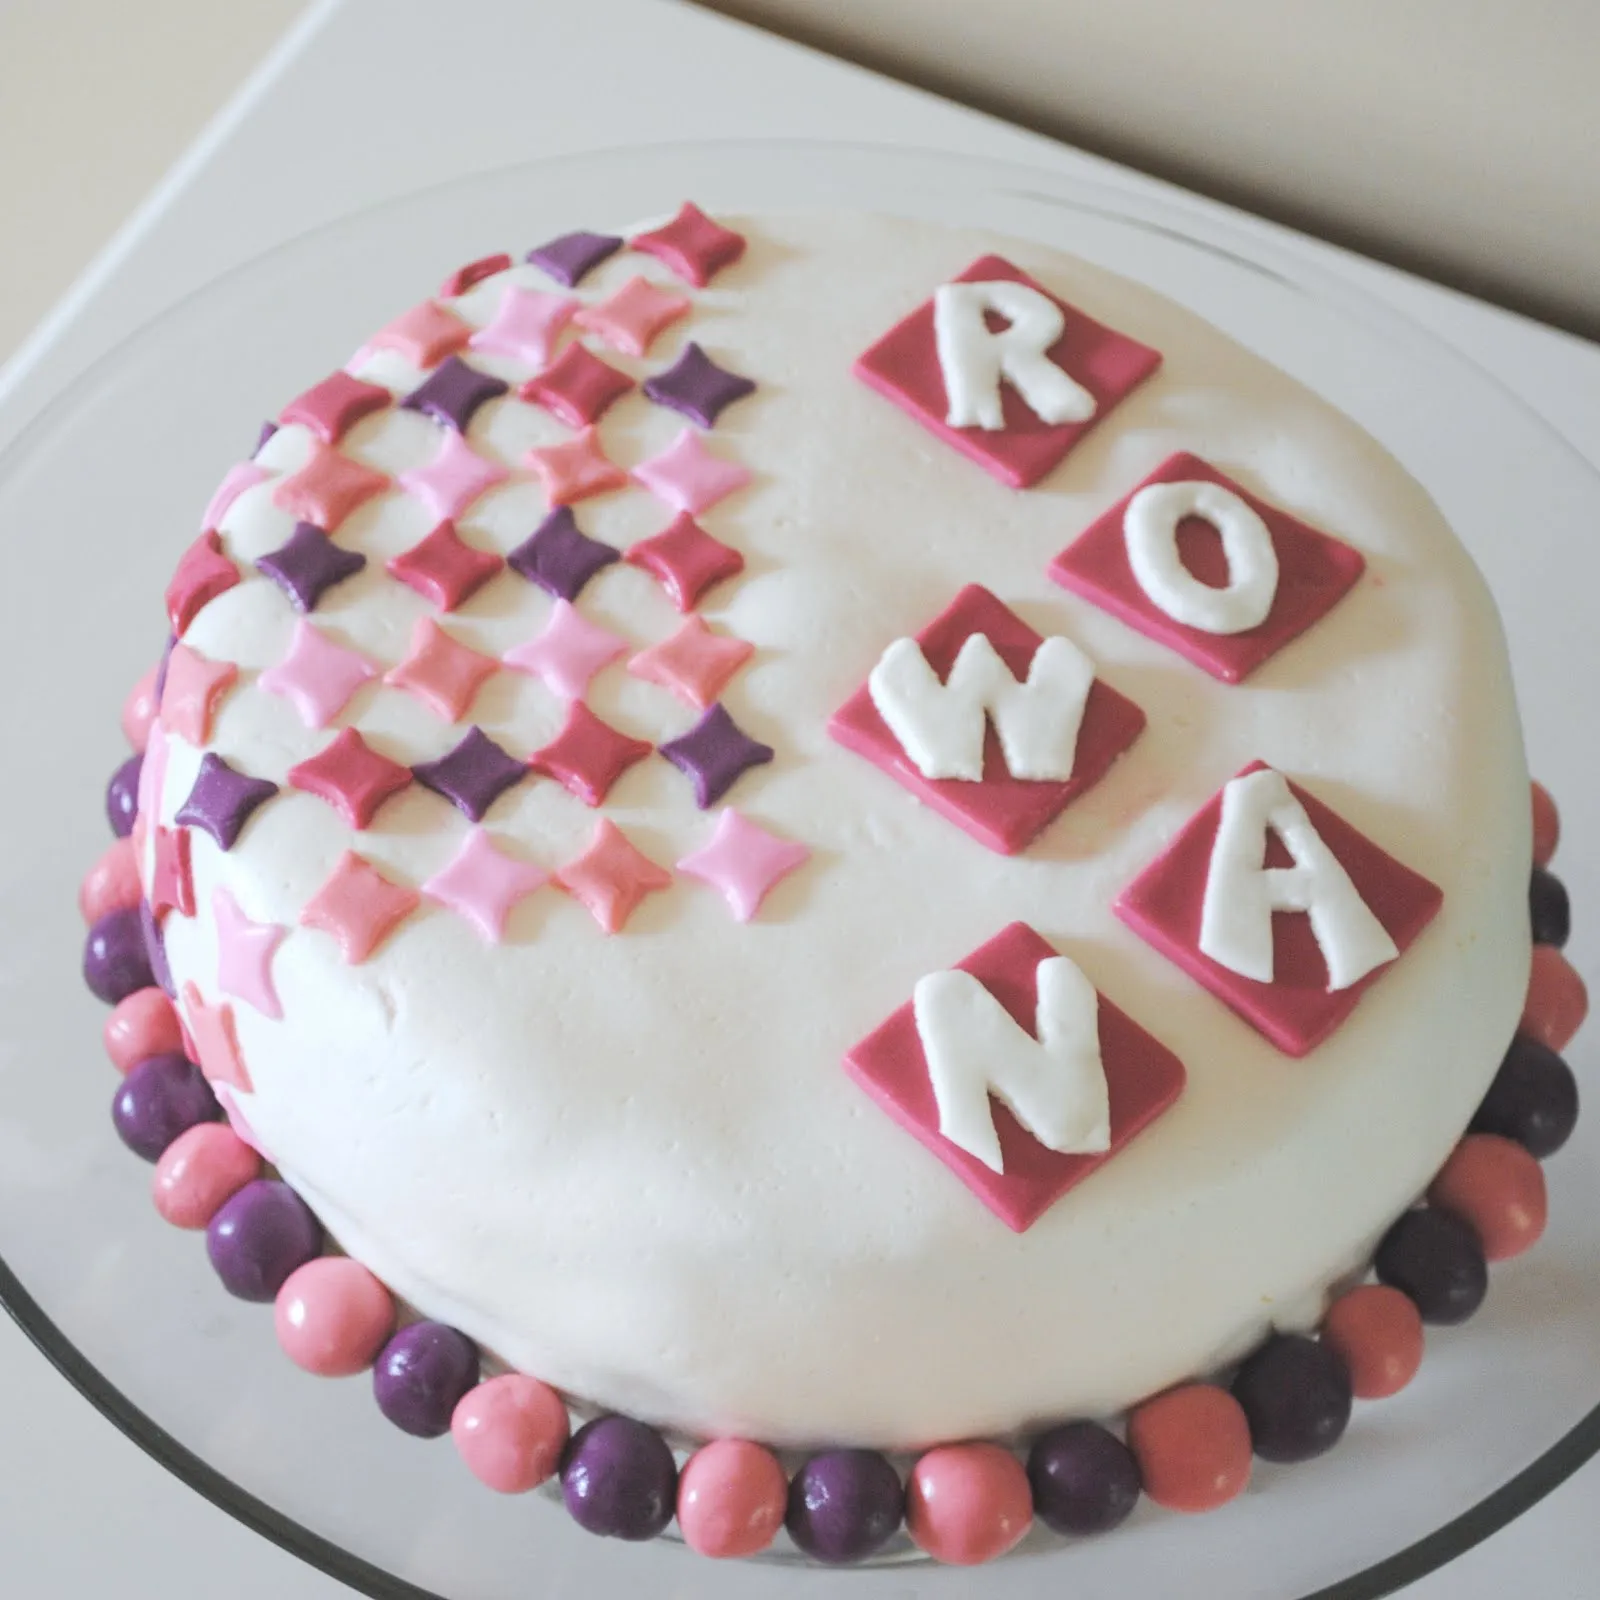 Homemade By Holman: Fondant: The First Attempt